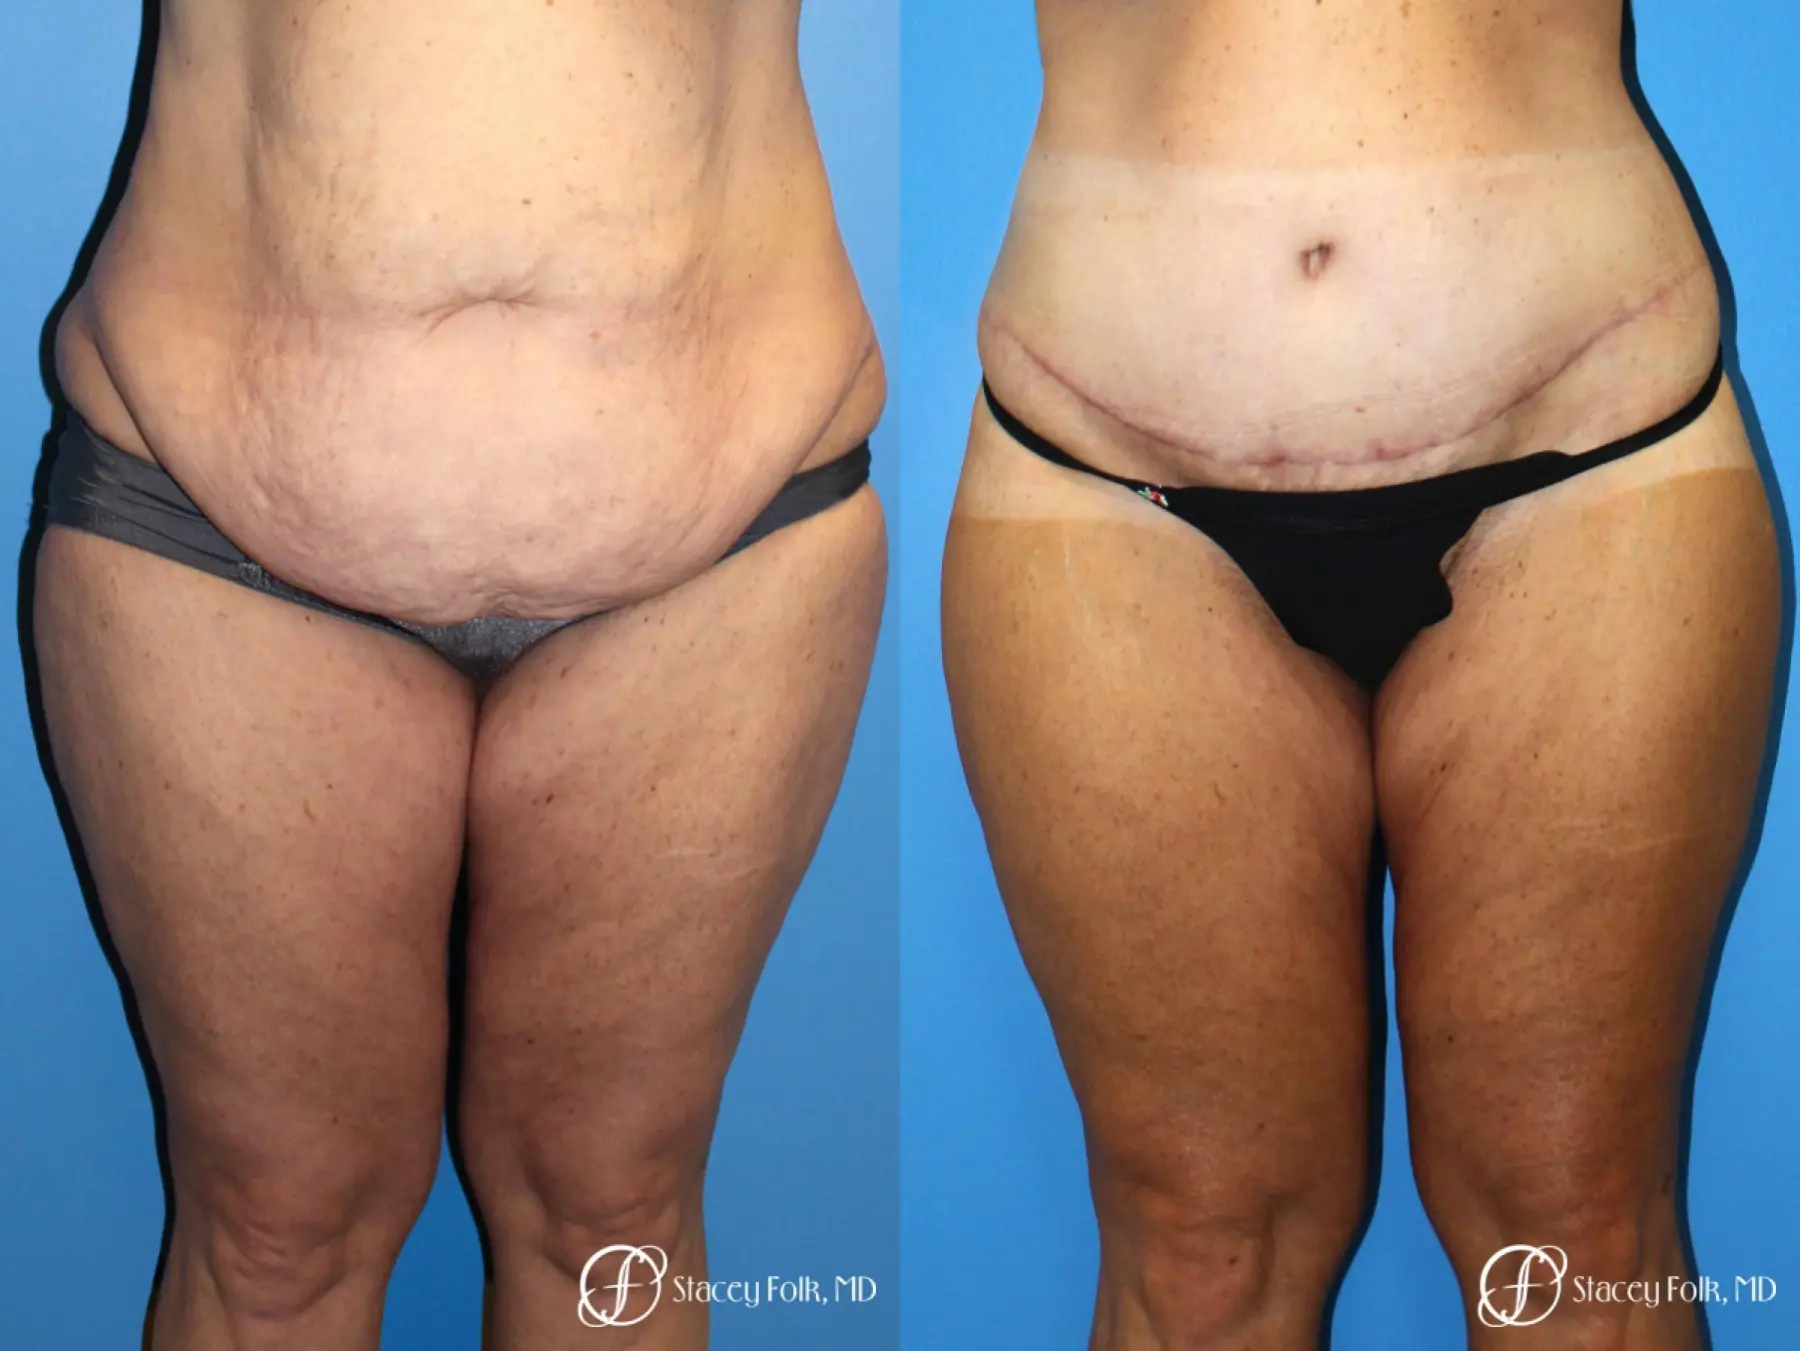 Denver Body Lift belt lipectomy, liposuction, mastopexy 5935 - Before and After